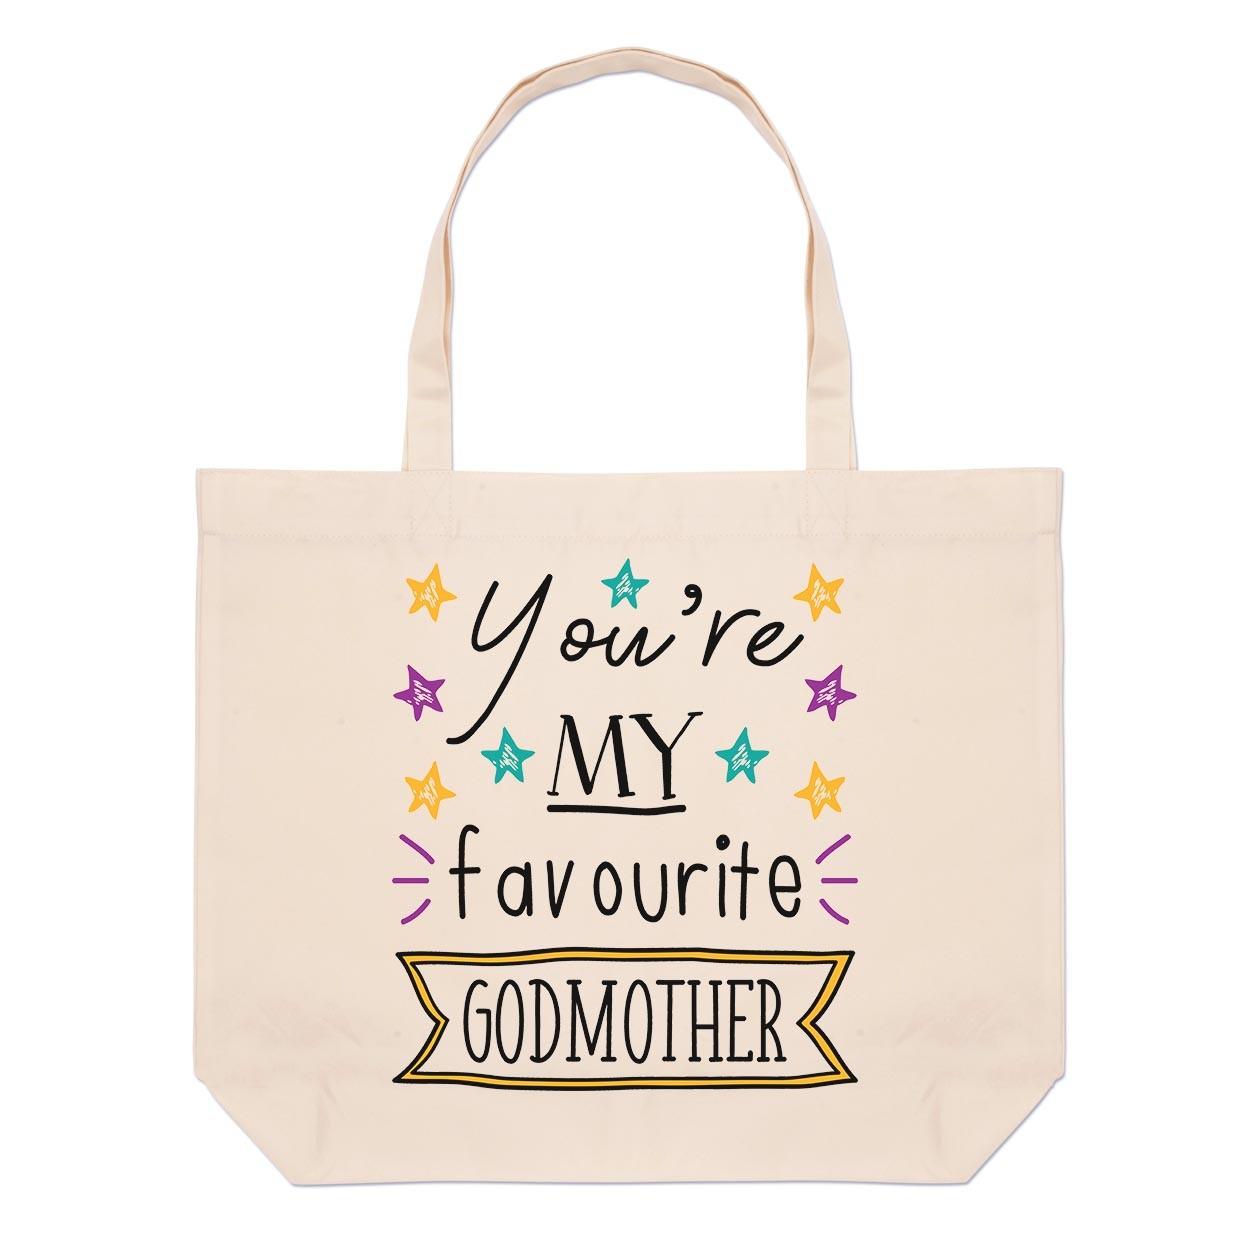 You're My Favourite Godmother Large Beach Tote Bag